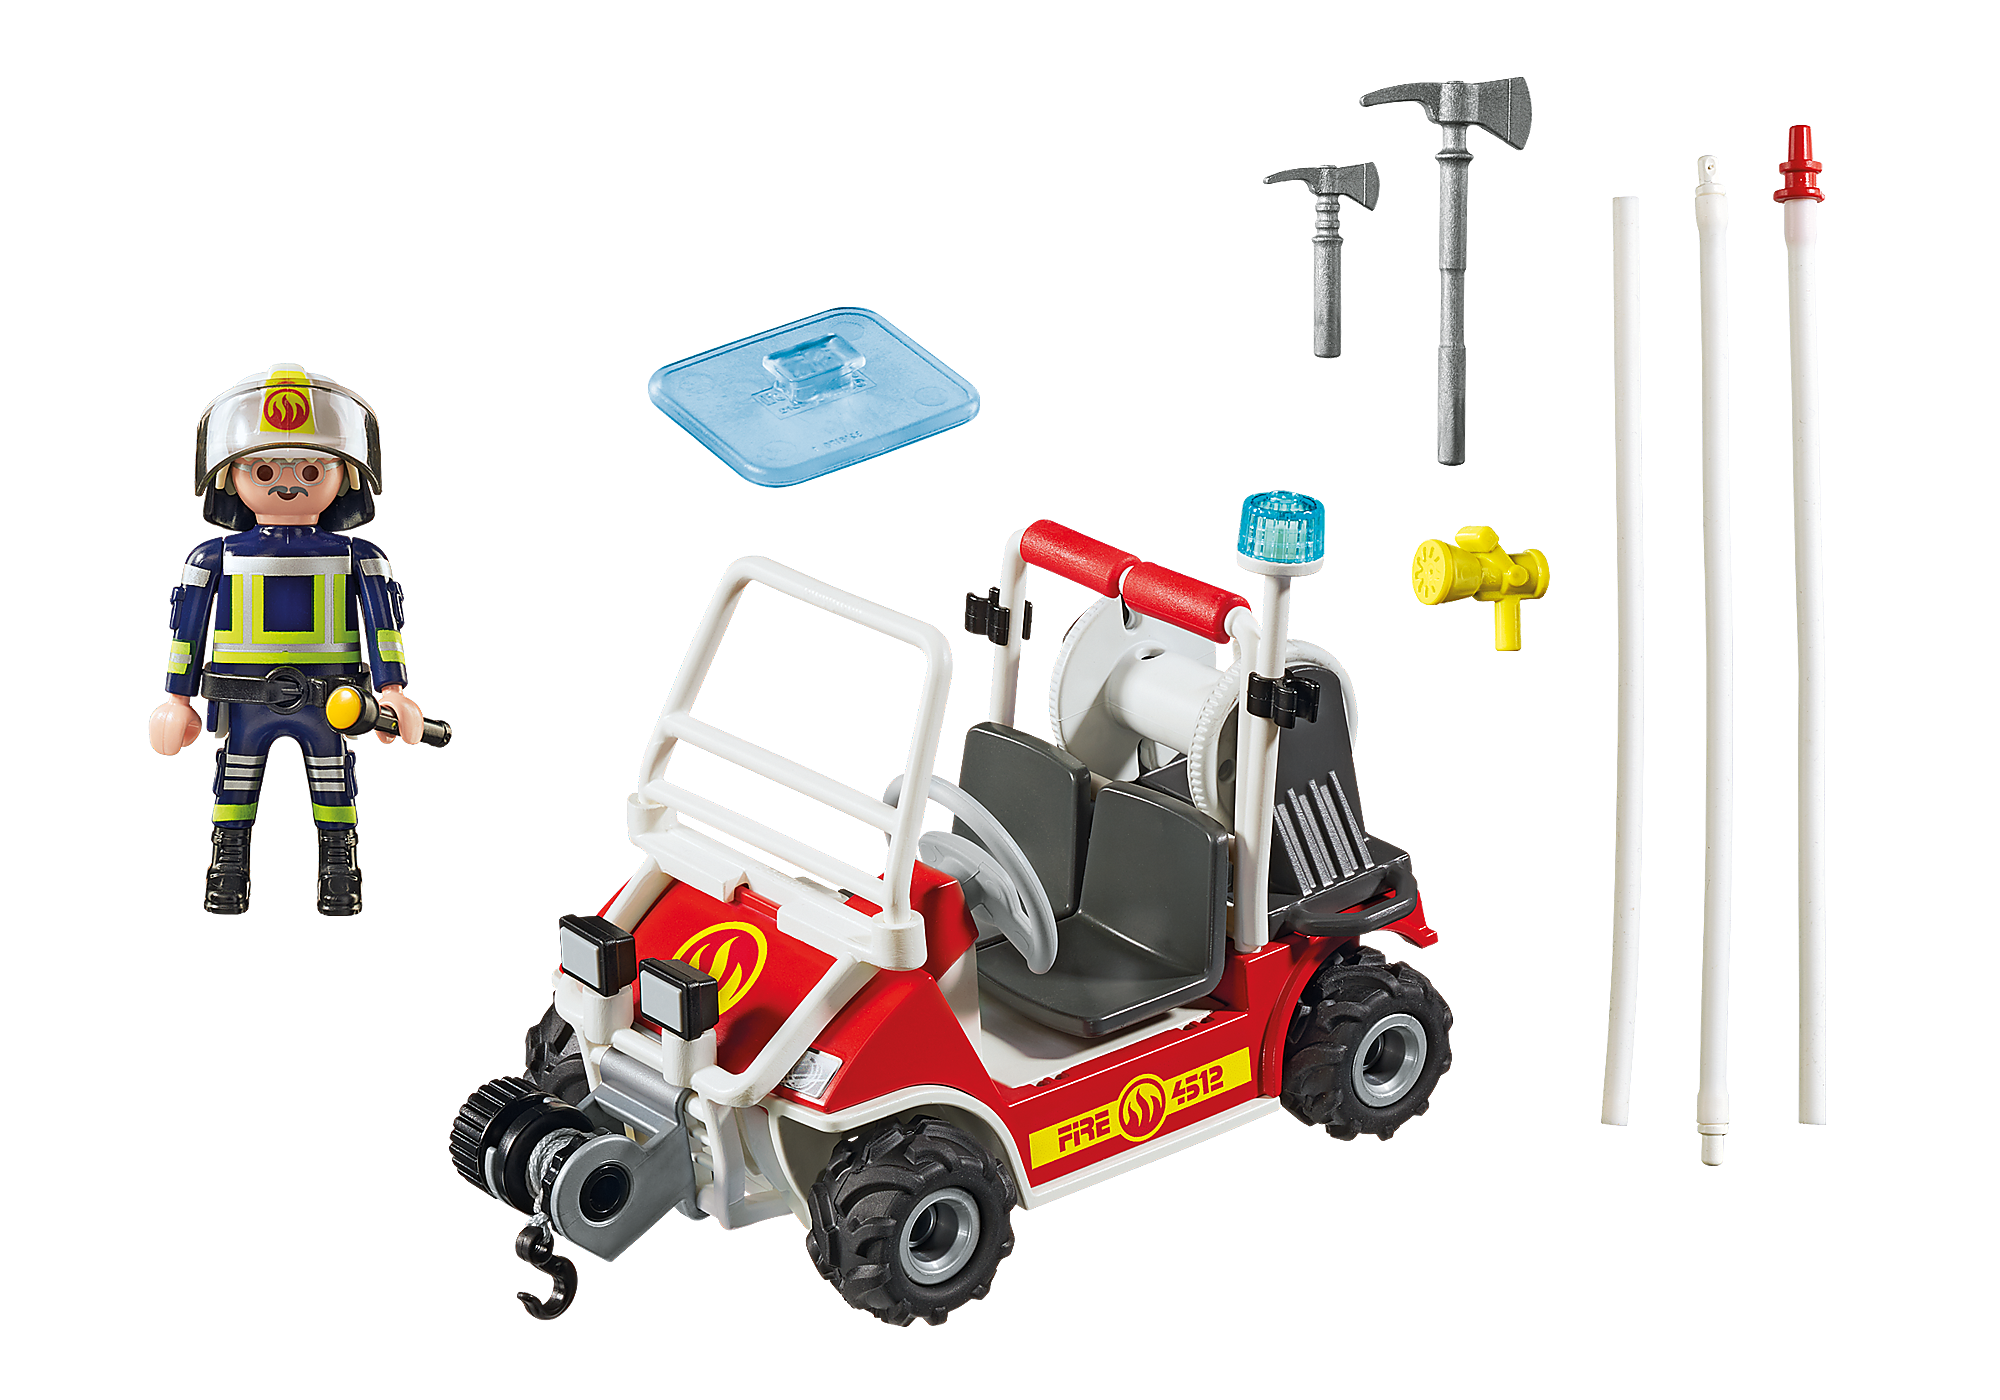 Playmobil Quad Vehicle Accessory 4x4 Friction Firefighters + Winch & Hook